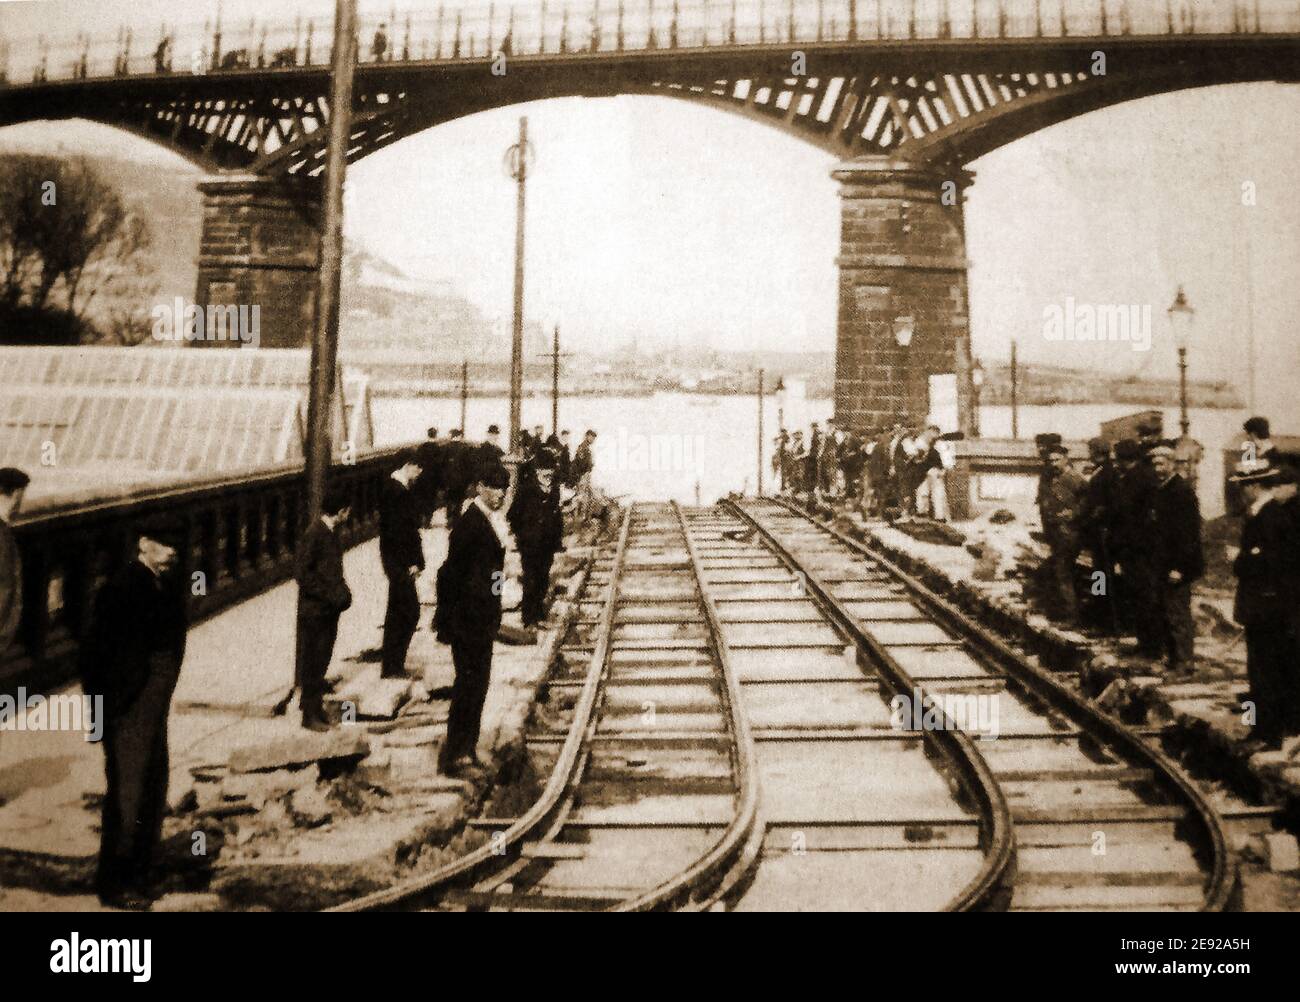 An old photograph taken in Scarborough, North Yorkshire, UK, showing the newly laid tramway tracks under Valley Bridge with workers, supervisors and observers gathering for a  photograph showing the completed section. Scarborough bay and harbour can be seen in the background. Construction began on 12th October 1903 (opened to the public on 6th May 1904) Stock Photo